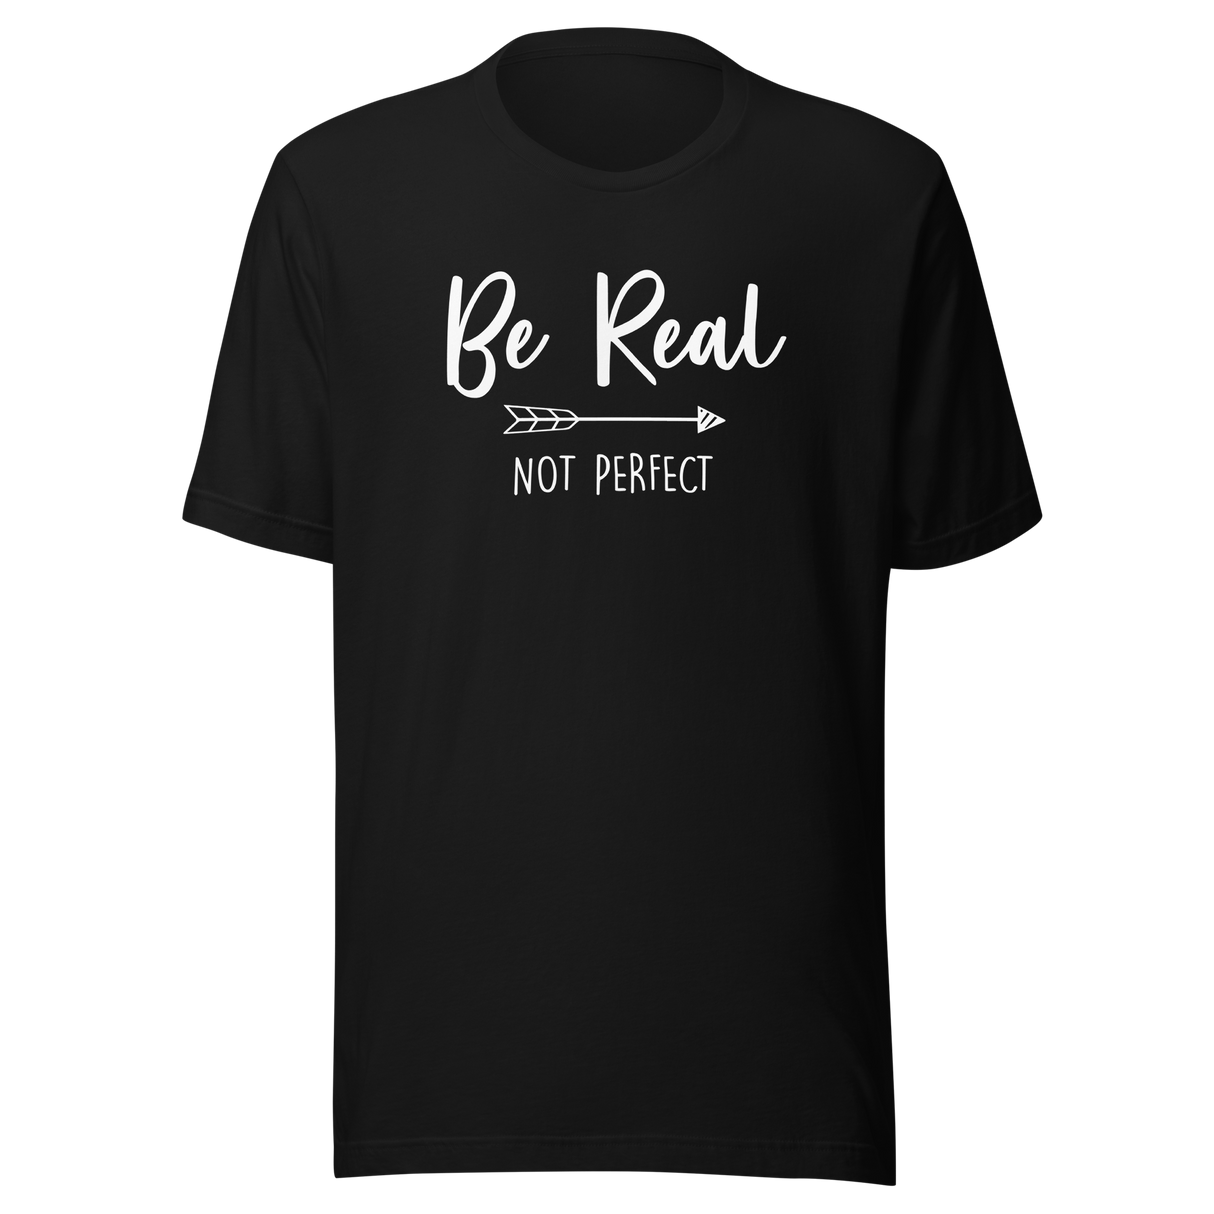 be-real-not-perfect-be-real-tee-perfect-t-shirt-inspirational-tee-t-shirt-tee#color_black